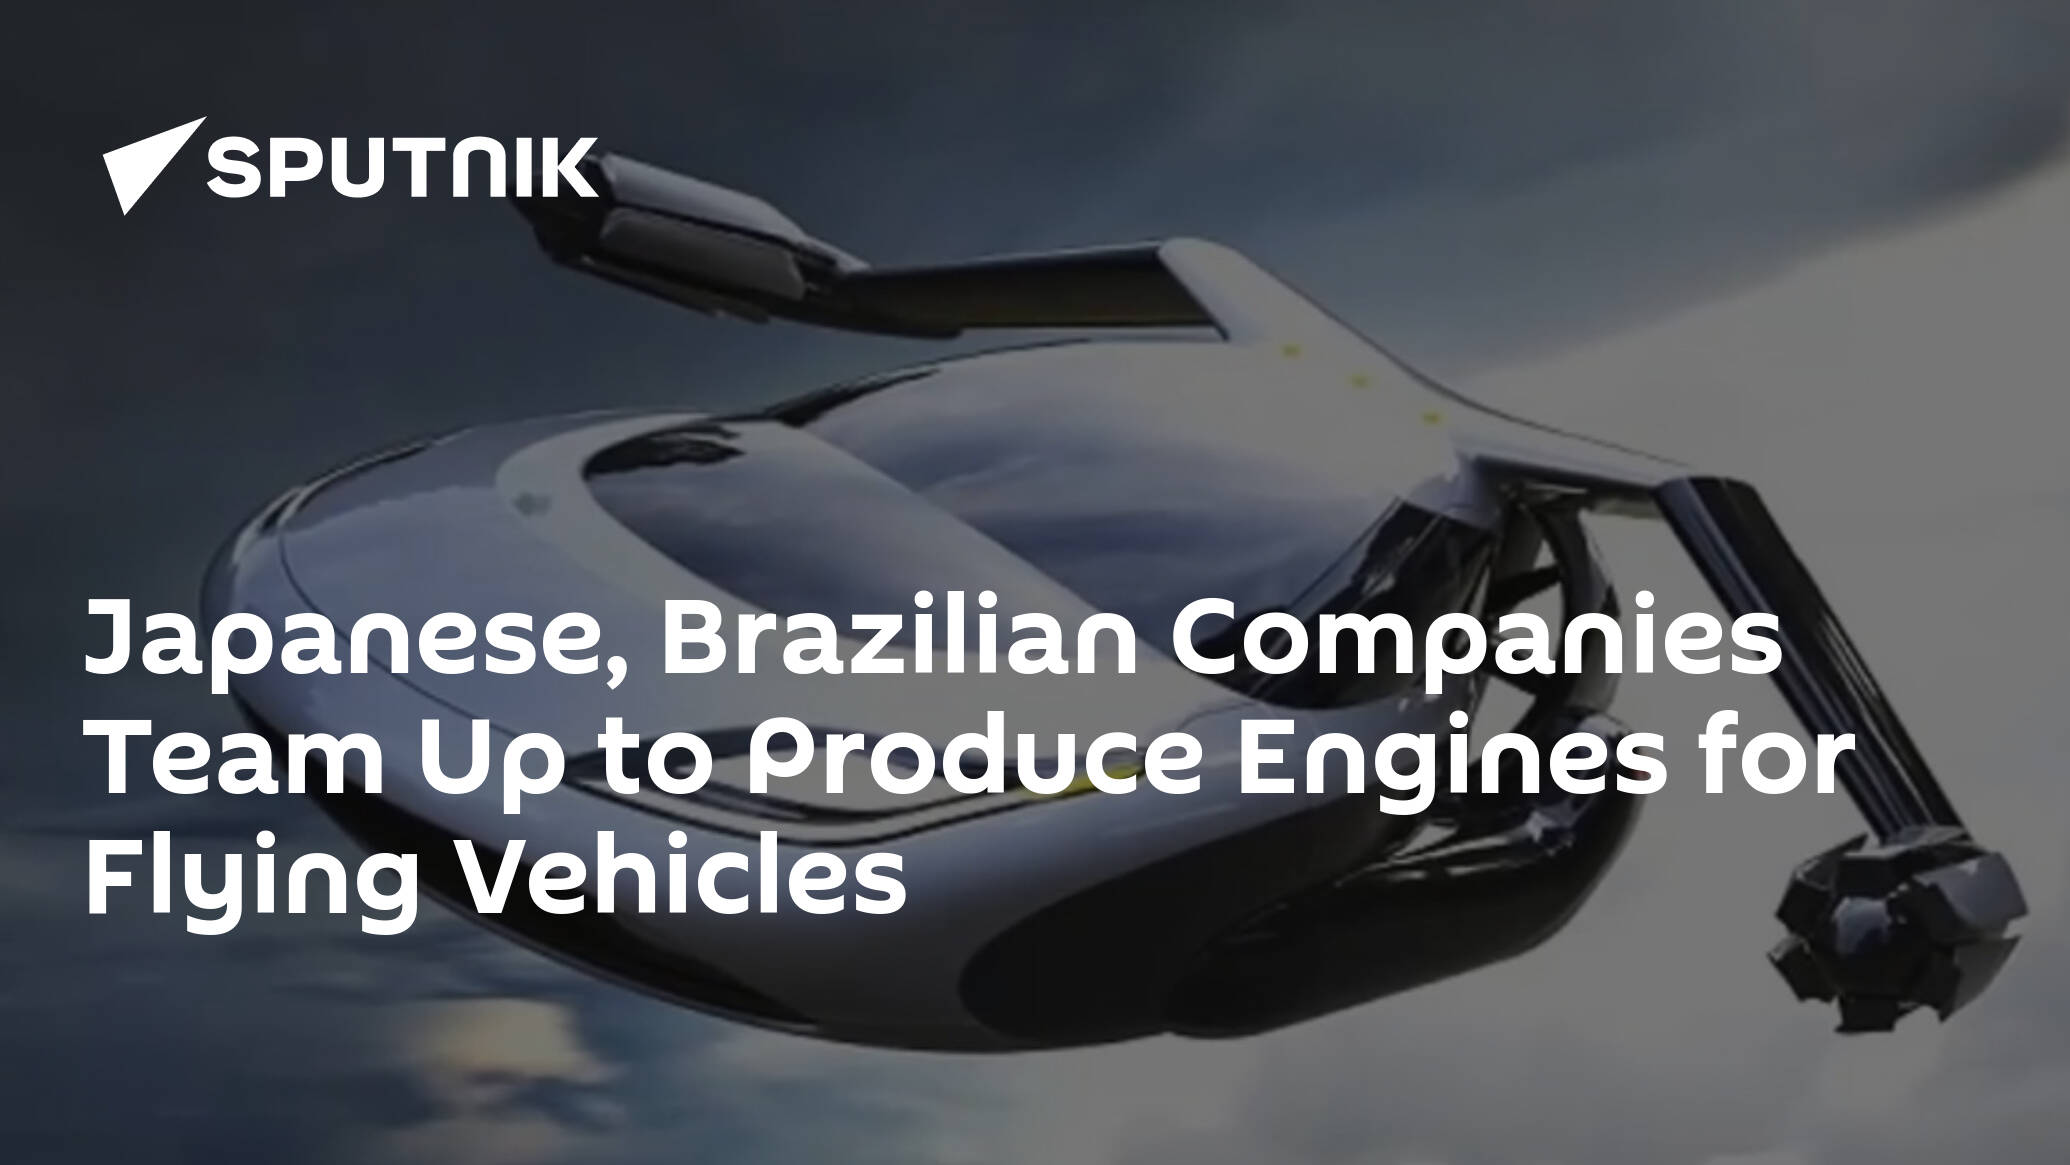 Japanese, Brazilian Companies Team Up to Produce Engines for Flying Vehicles